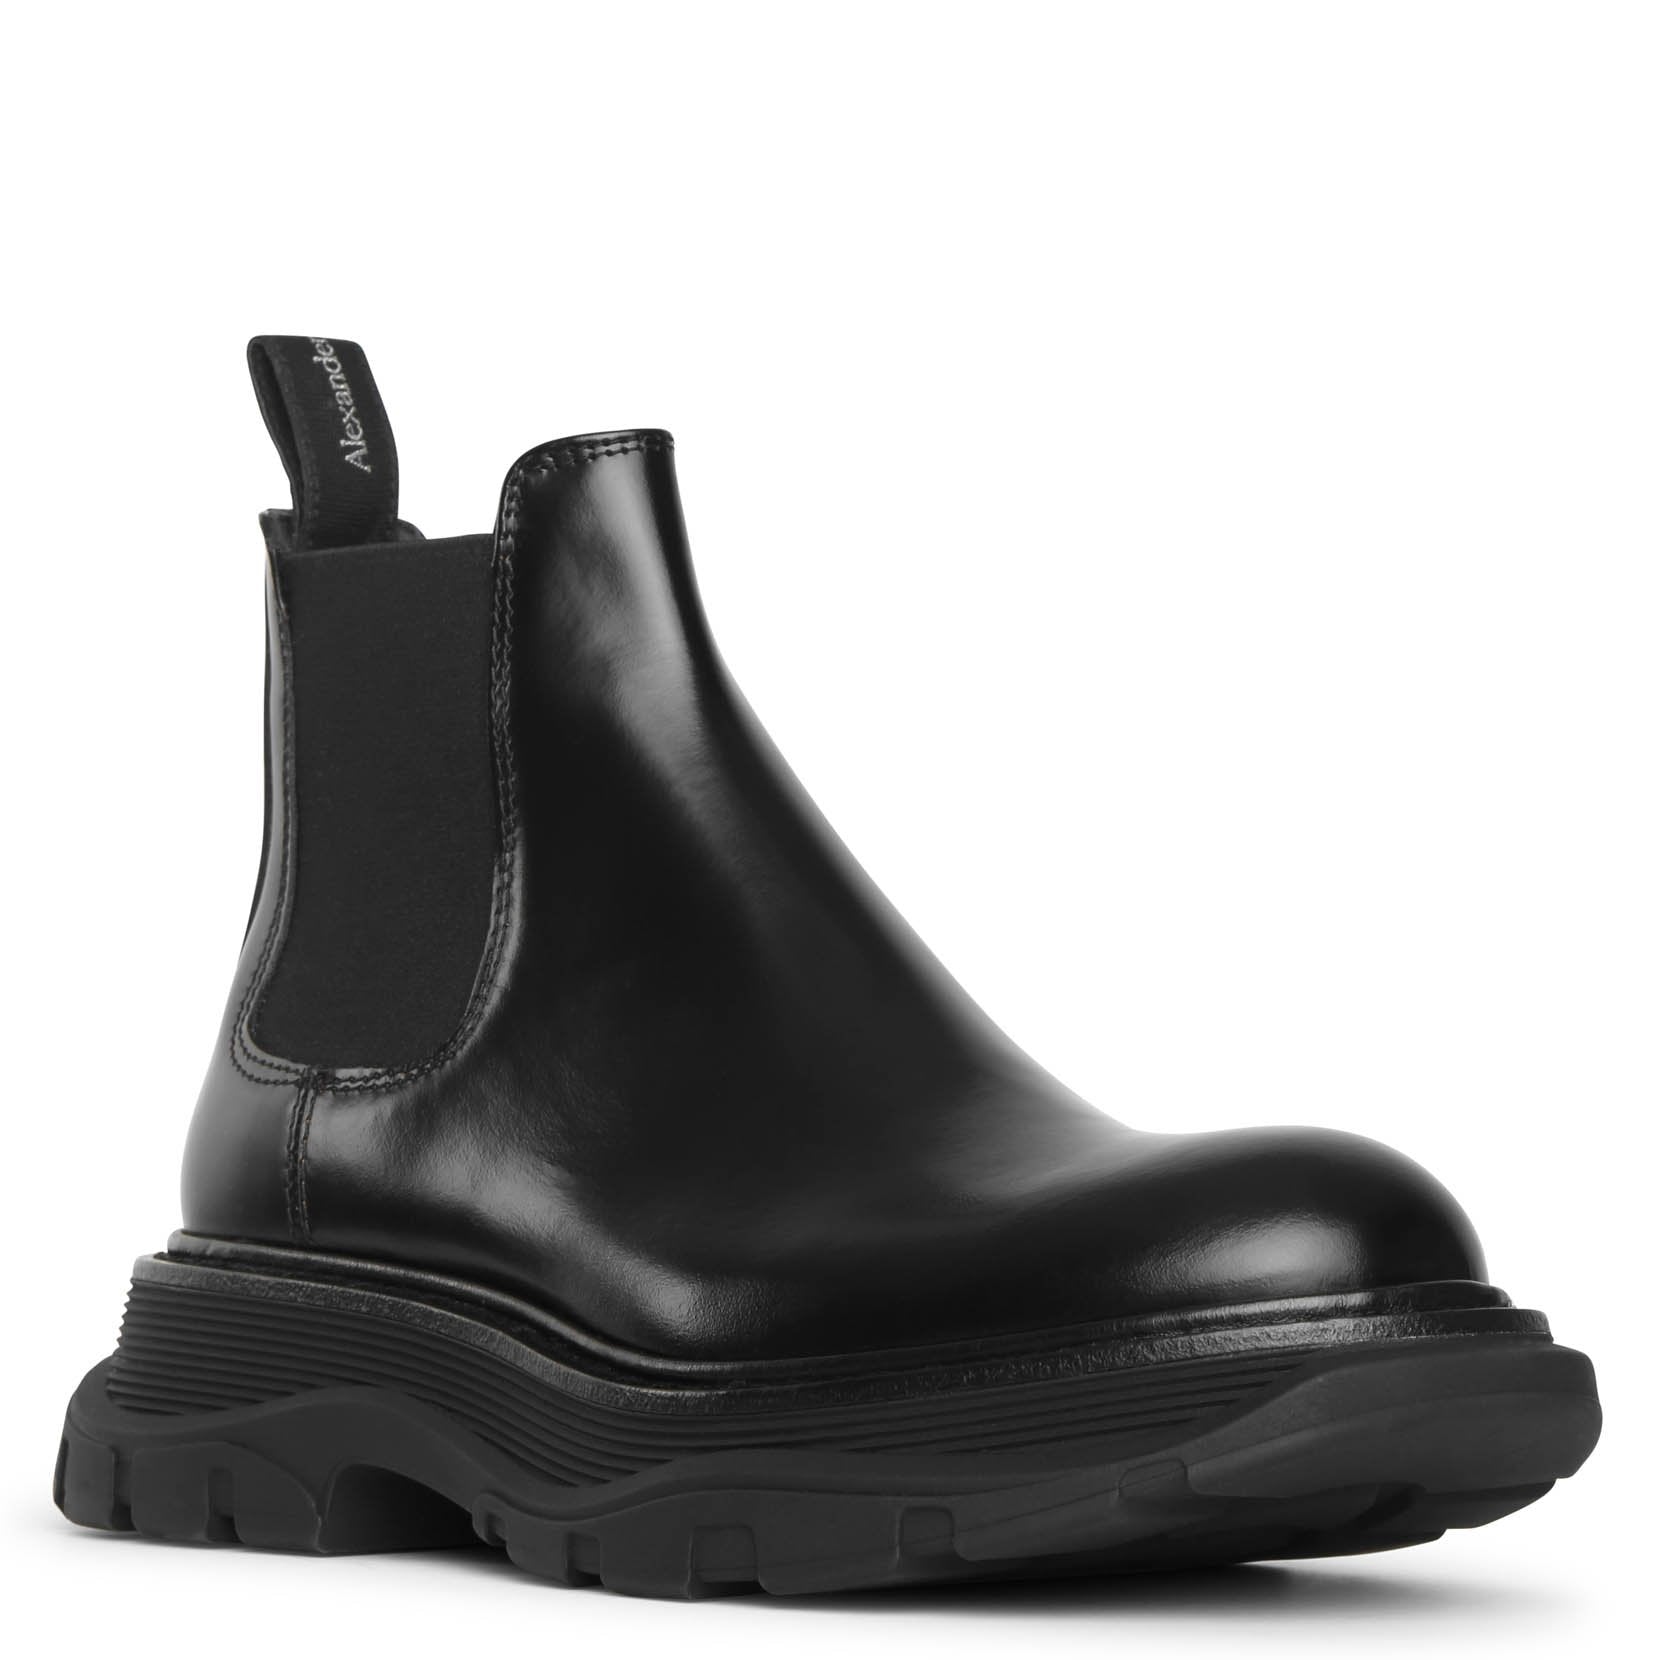 Tread chelsea leather boots